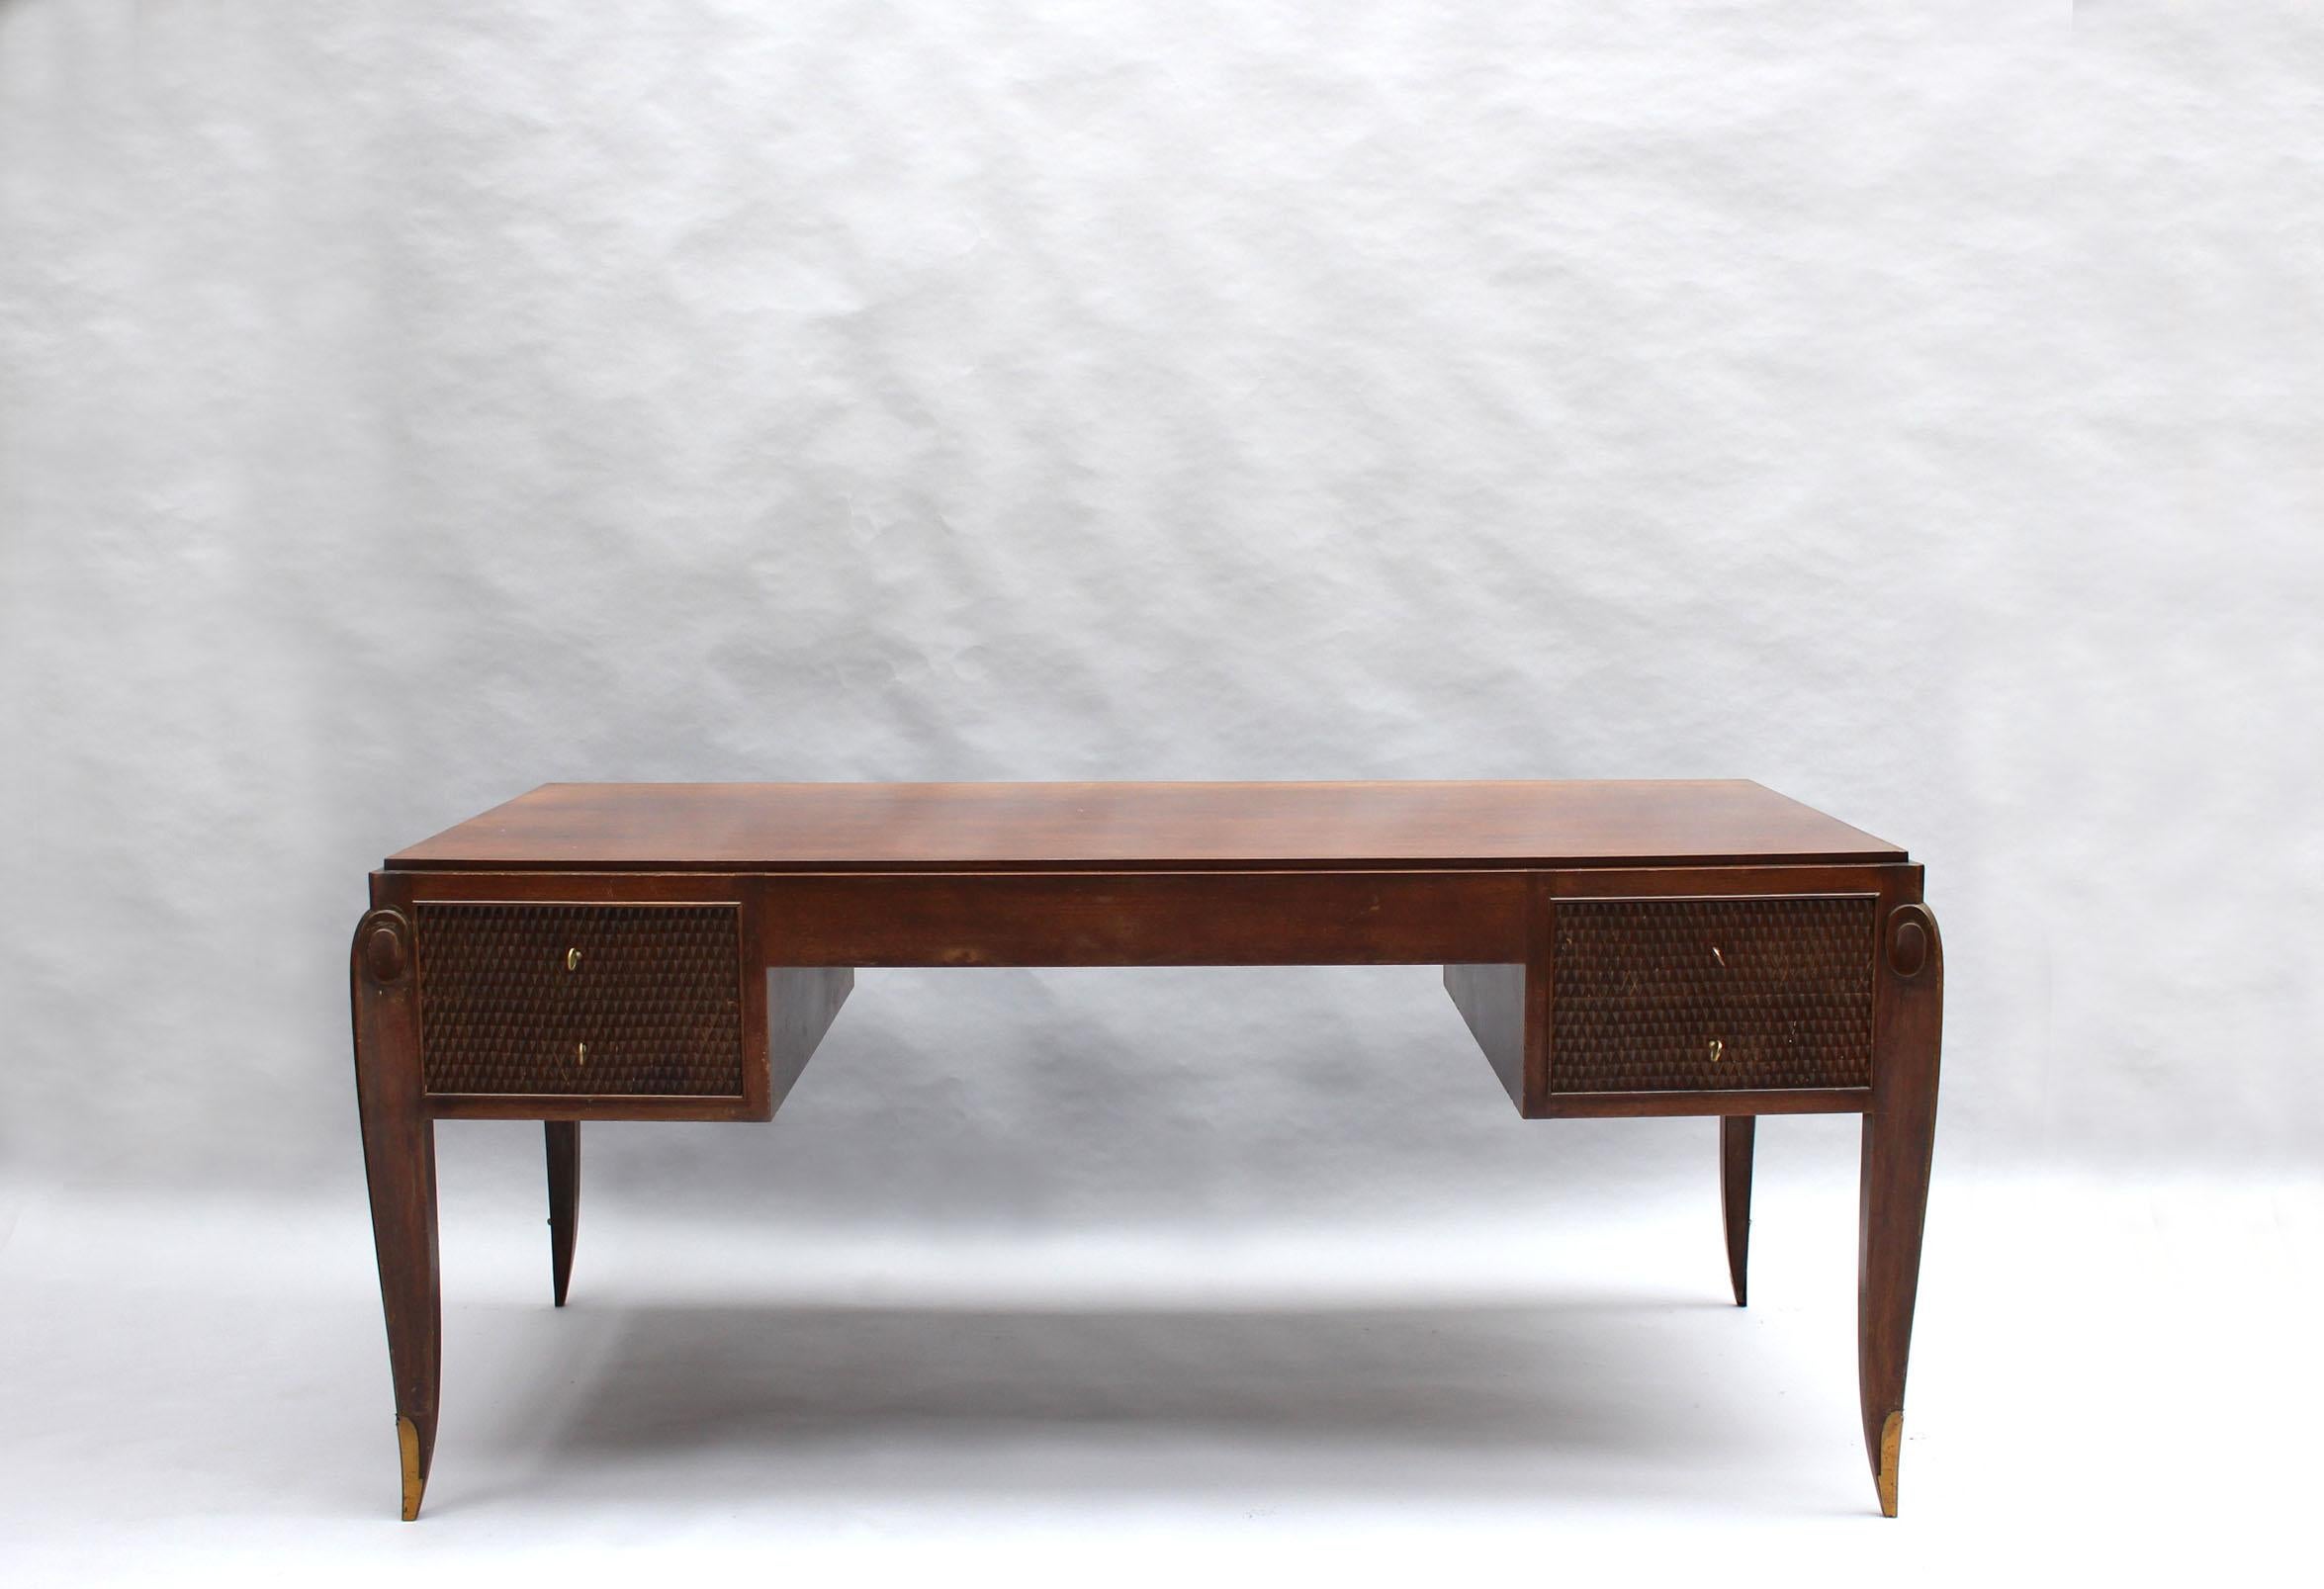 Jean Pascaud (1903-1996) - A fine French art deco walnut stained desk and cabinet / armoire.
The desk has four drawers with a carved diamond pattern and four scroll legs with bronze sabots.
The cabinet also has a carved diamond pattern that frames